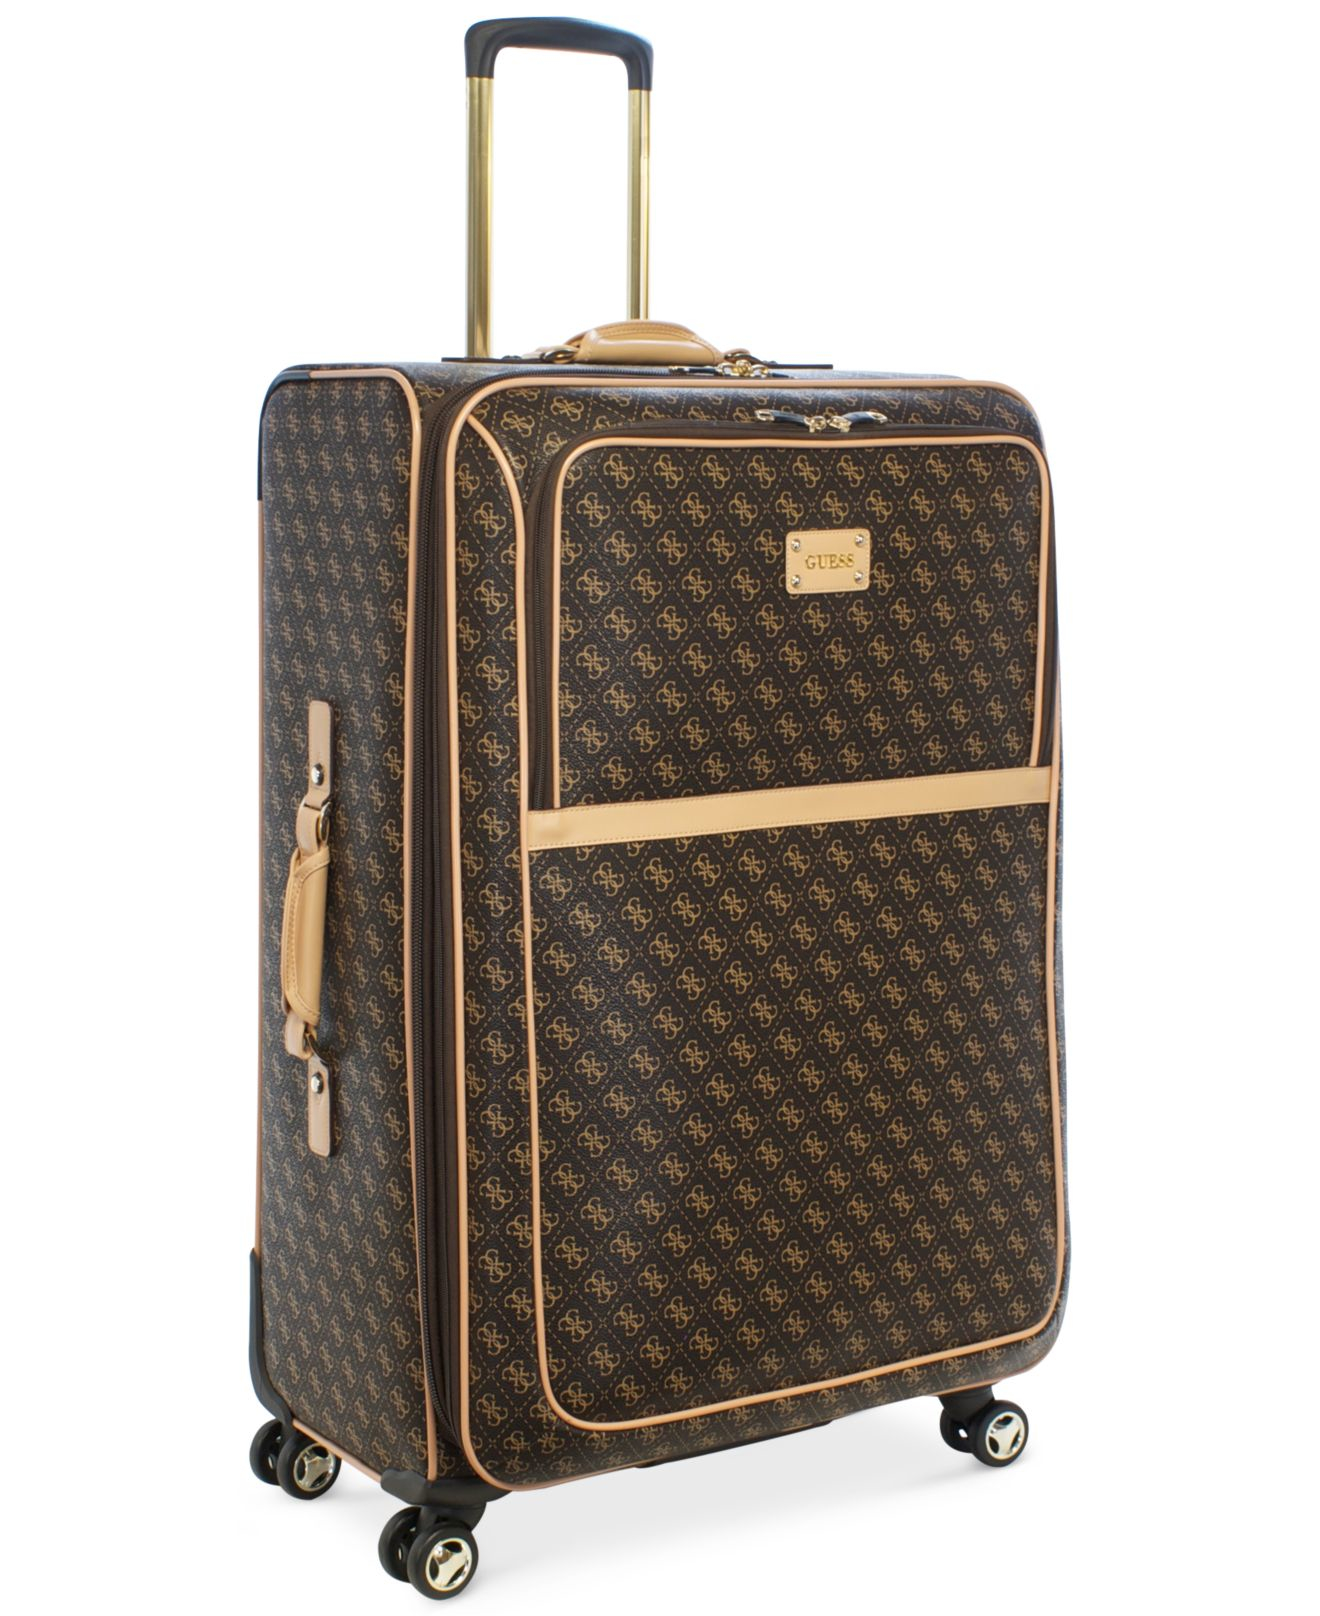 Guess Logo Affair Dlx 29" Spinner Suitcase in Tan (Brown) for Men - Lyst